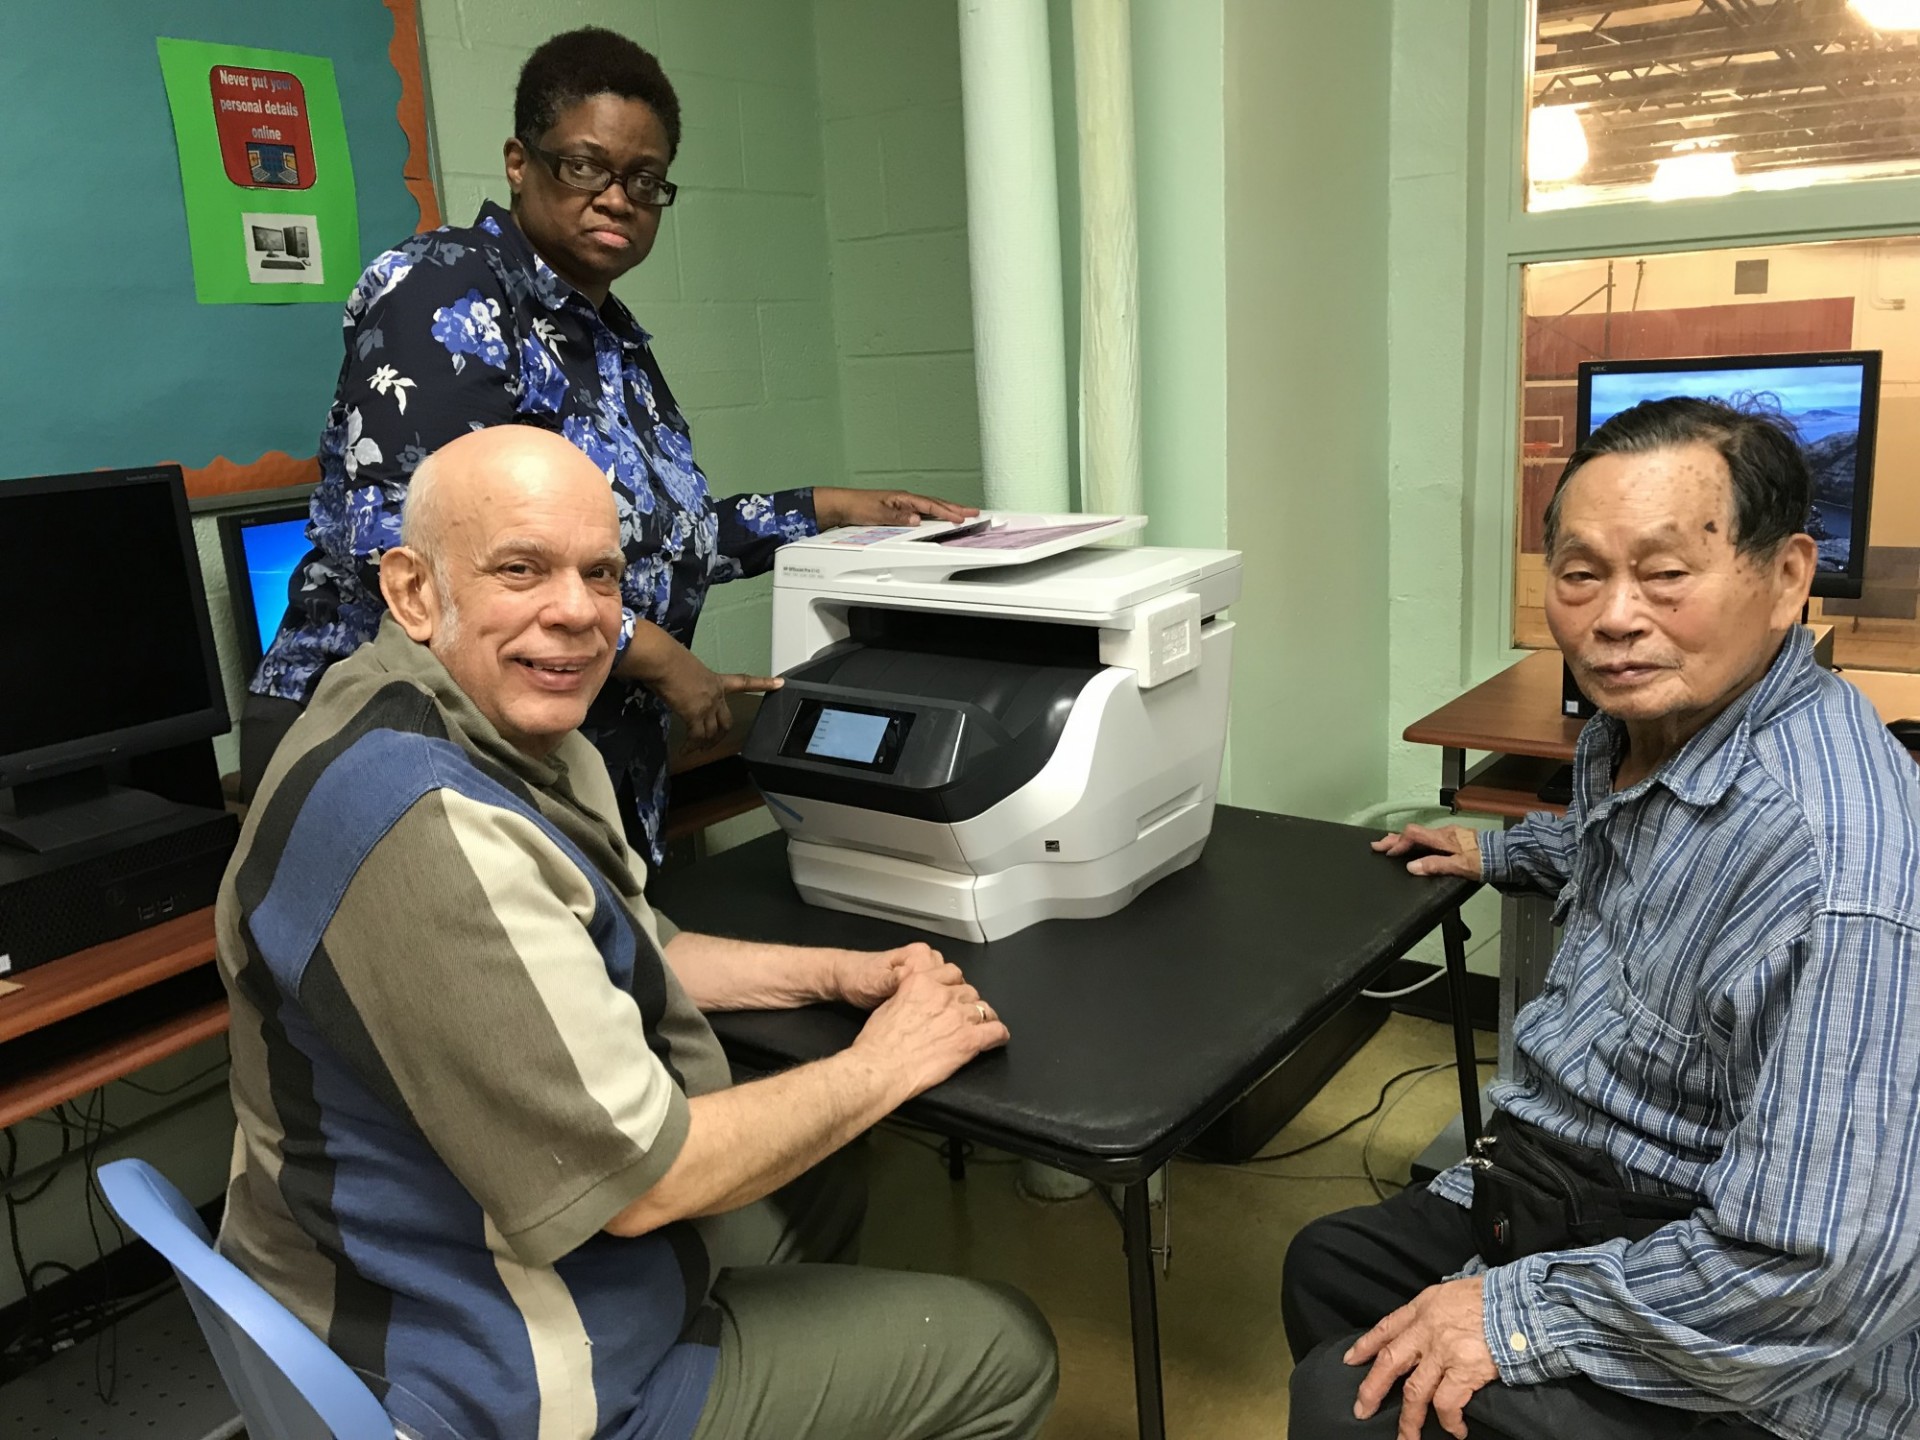 Seniors at PSS Manhattanville Center are using the new printer donated by Columbia to serve their printing and scanning needs.